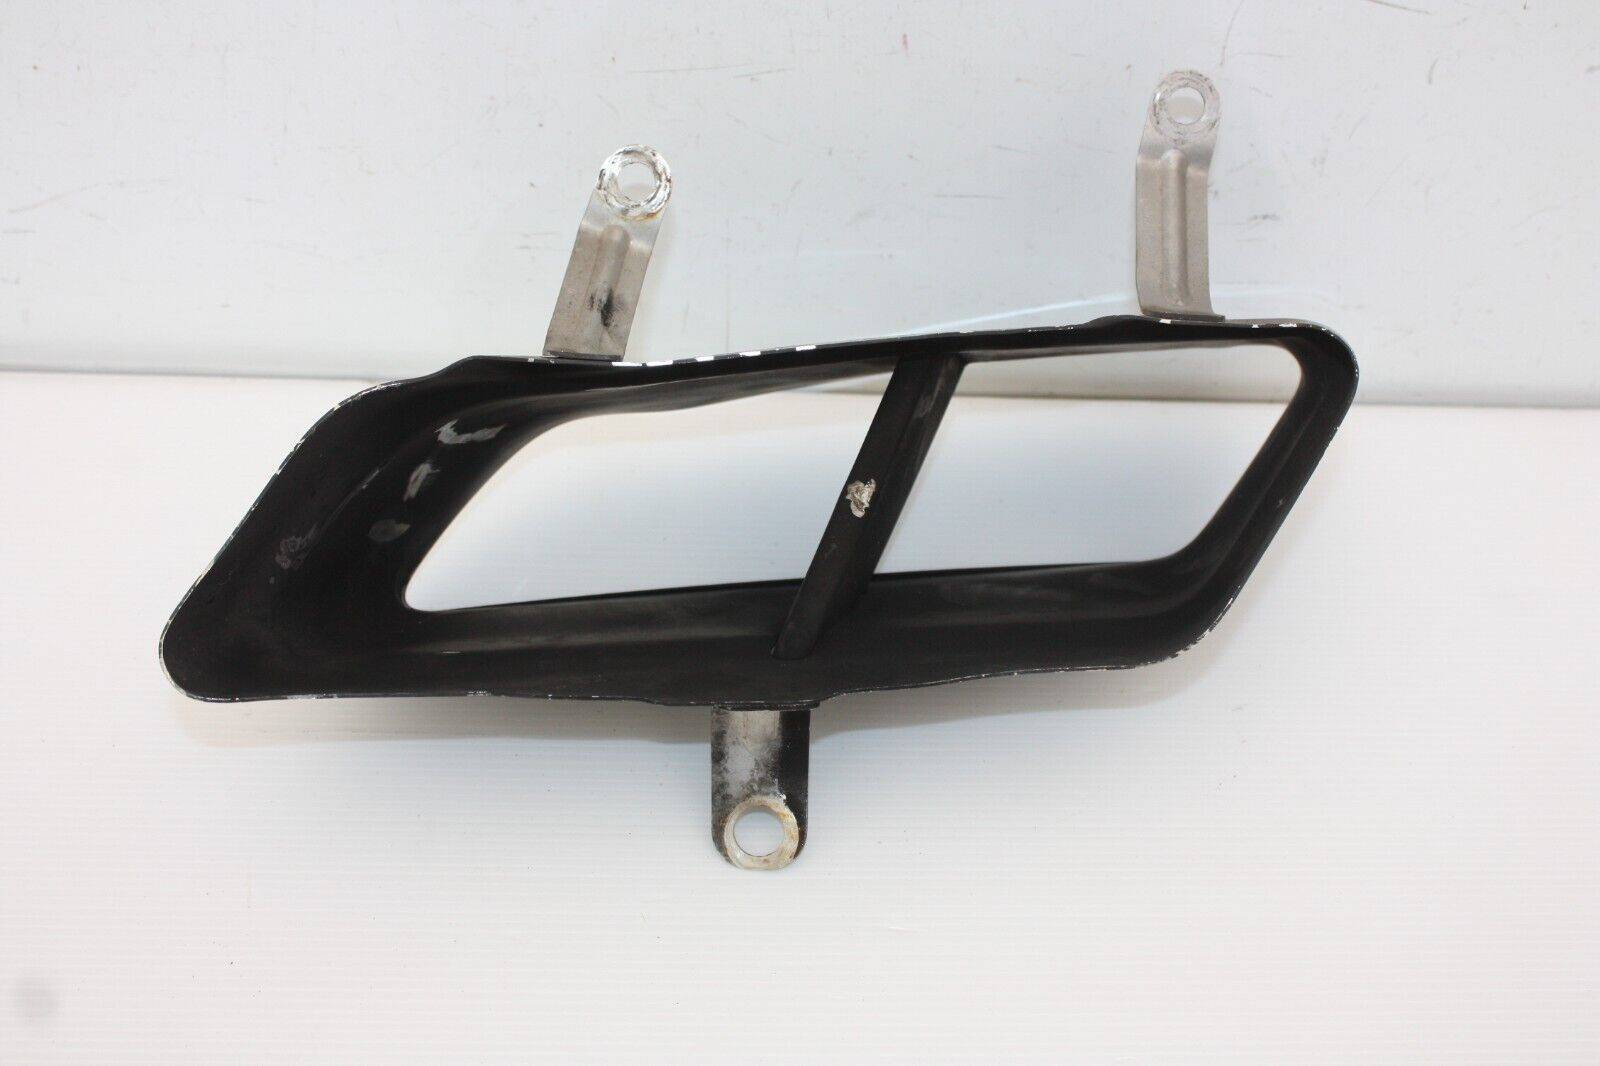 Audi-R8-Rear-Bumper-Right-Side-Exhaust-4S0251238A-Genuine-SEE-PICS-175453860238-7